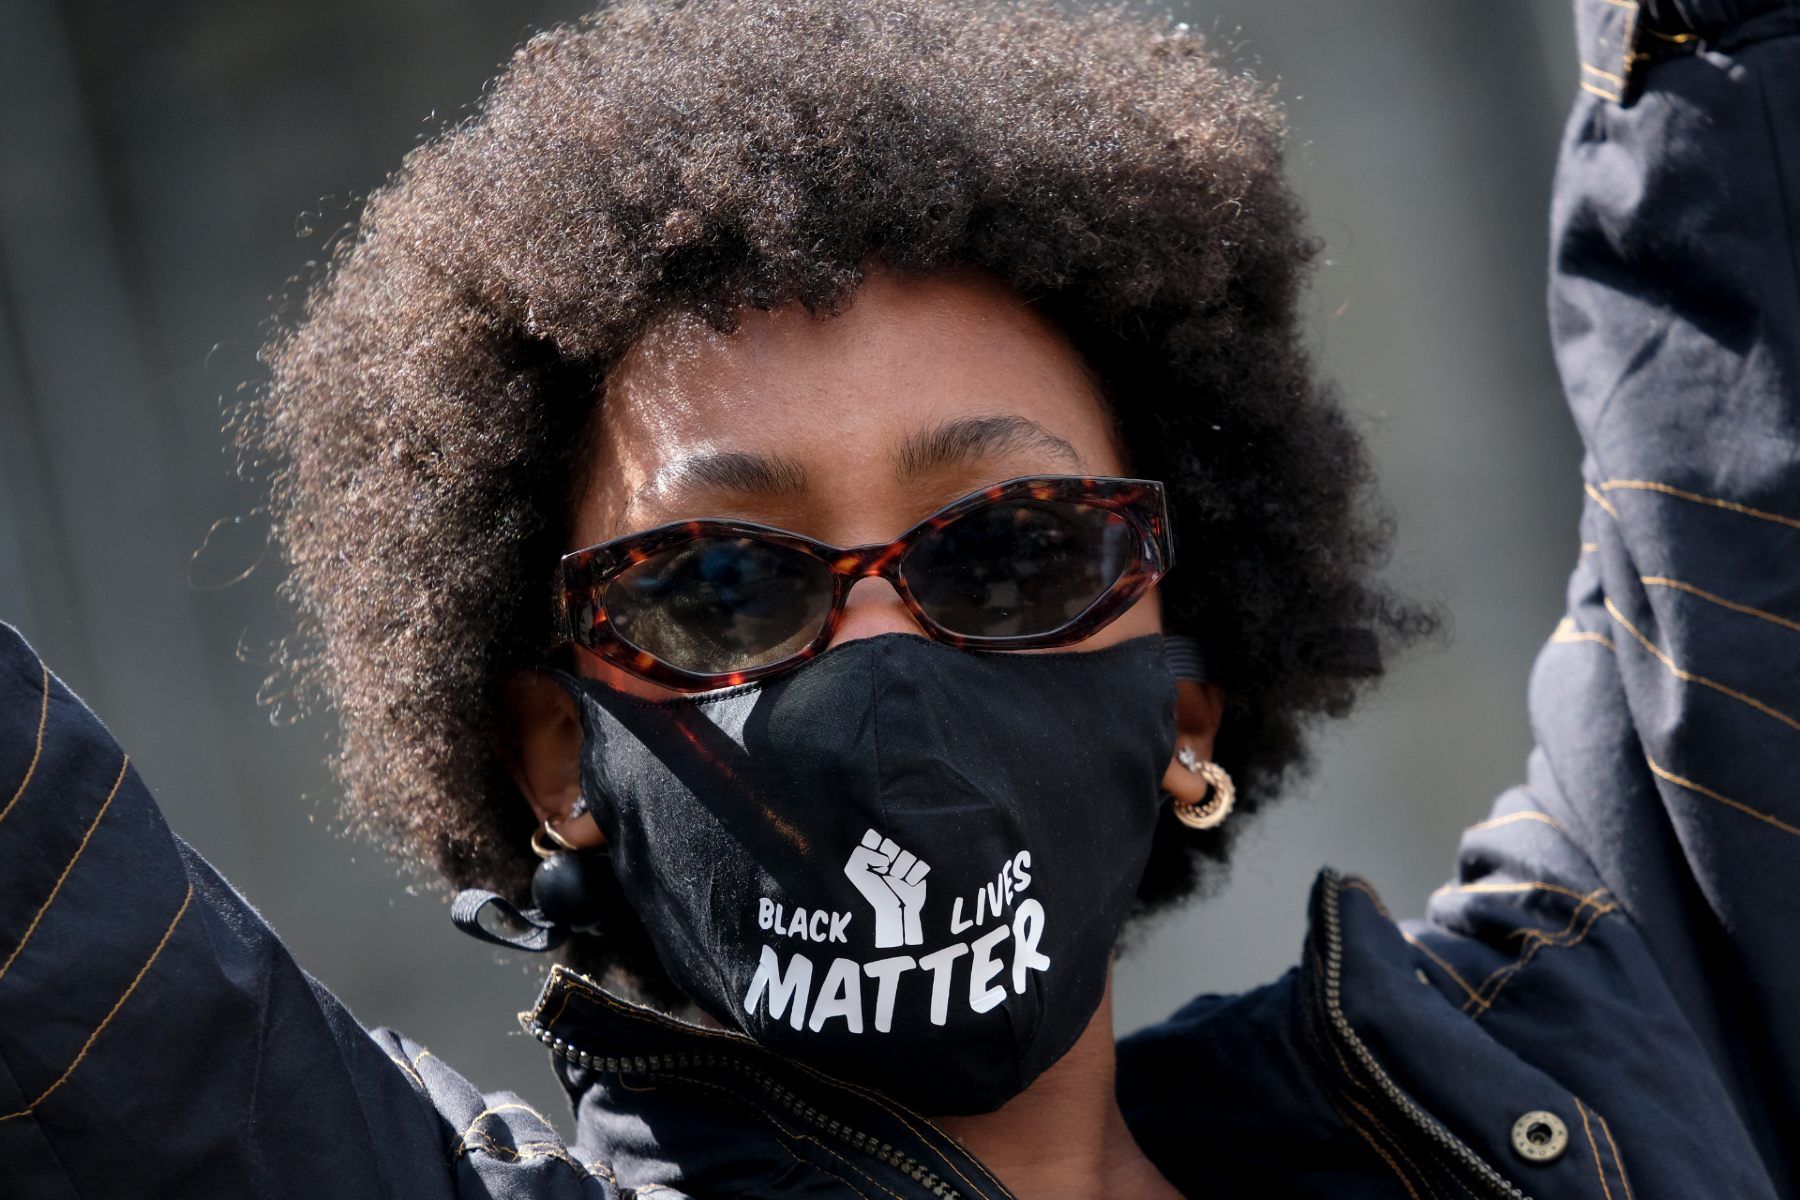 Protester wearing sunglasses and a face mask that reads "Black lives matter" with an image of a fist